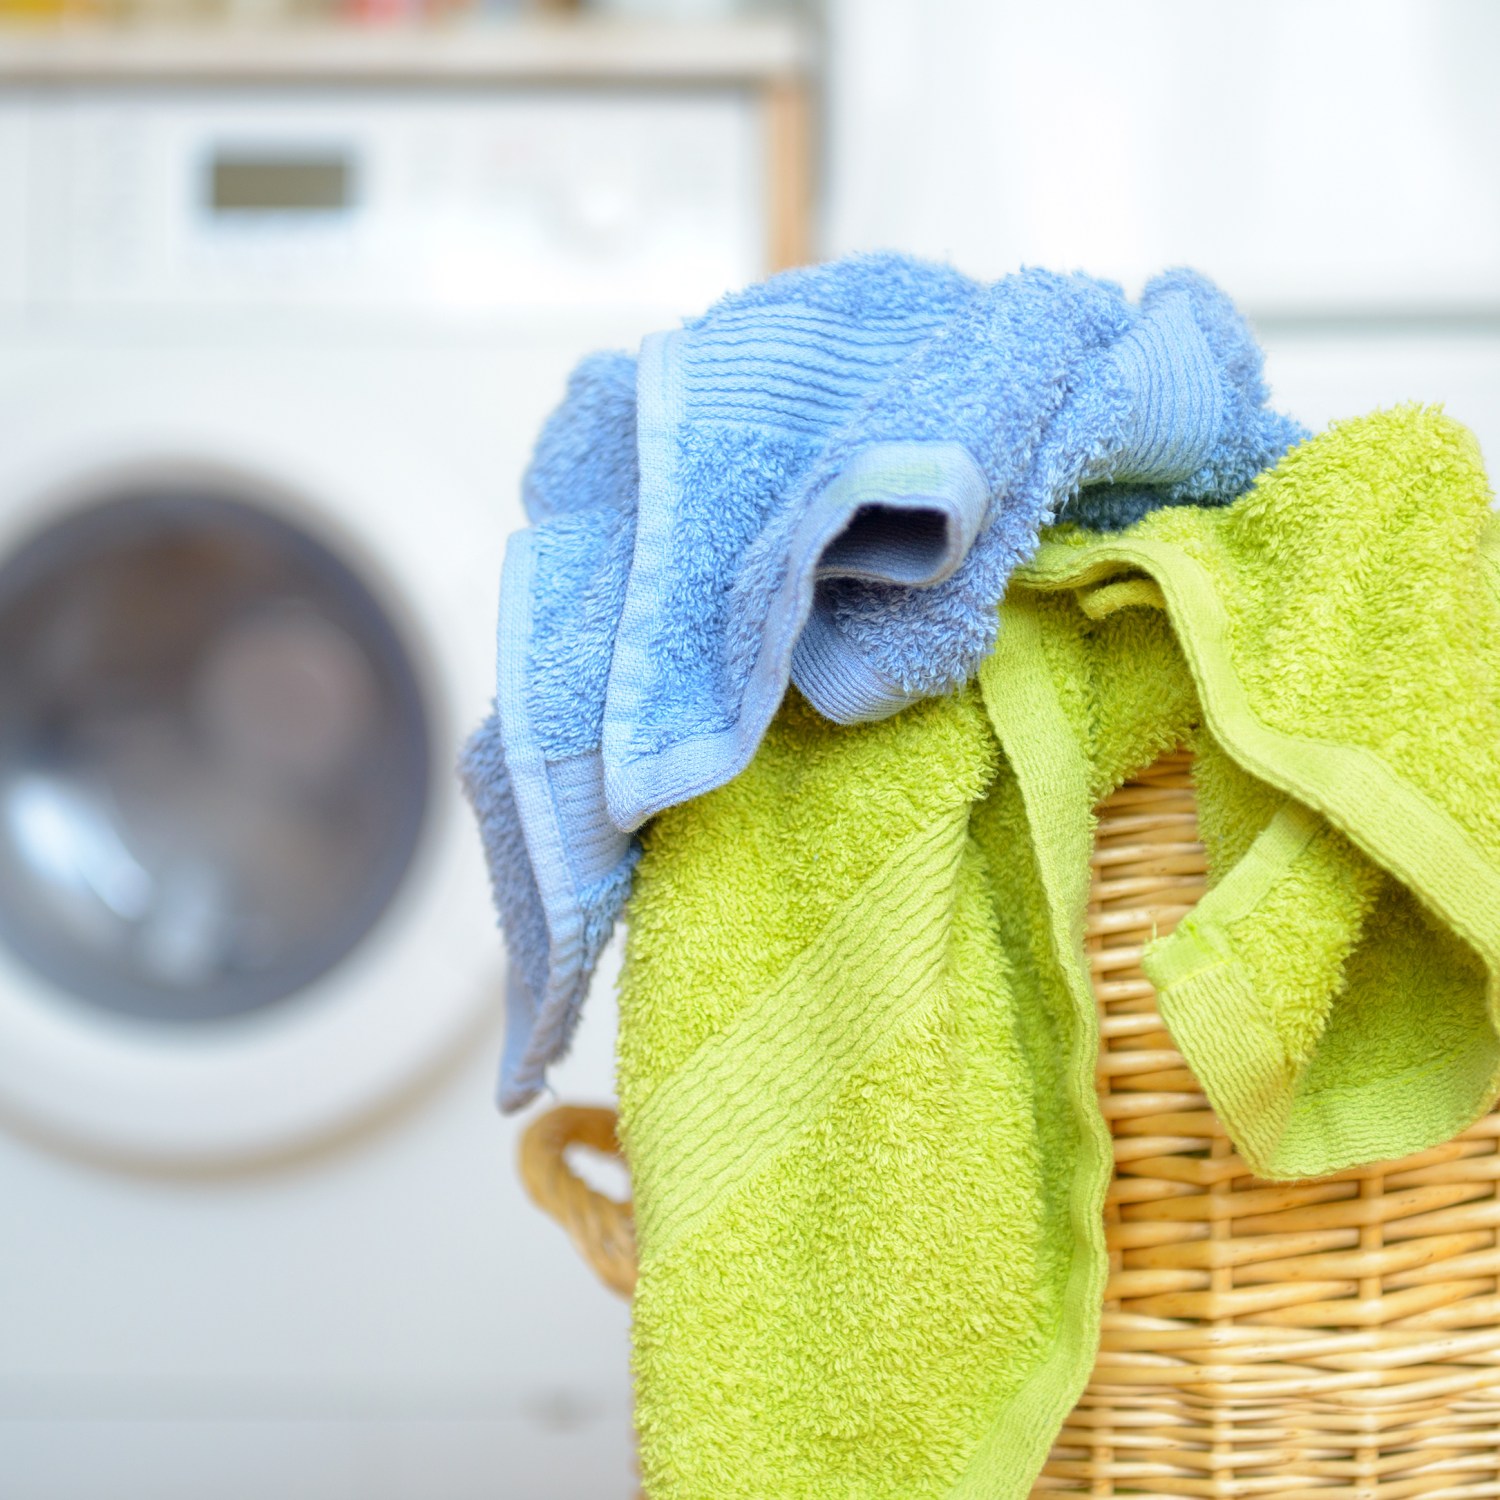 wicker laundry basket with dirty blue and green towels waiting for laundry with white washing machine in background